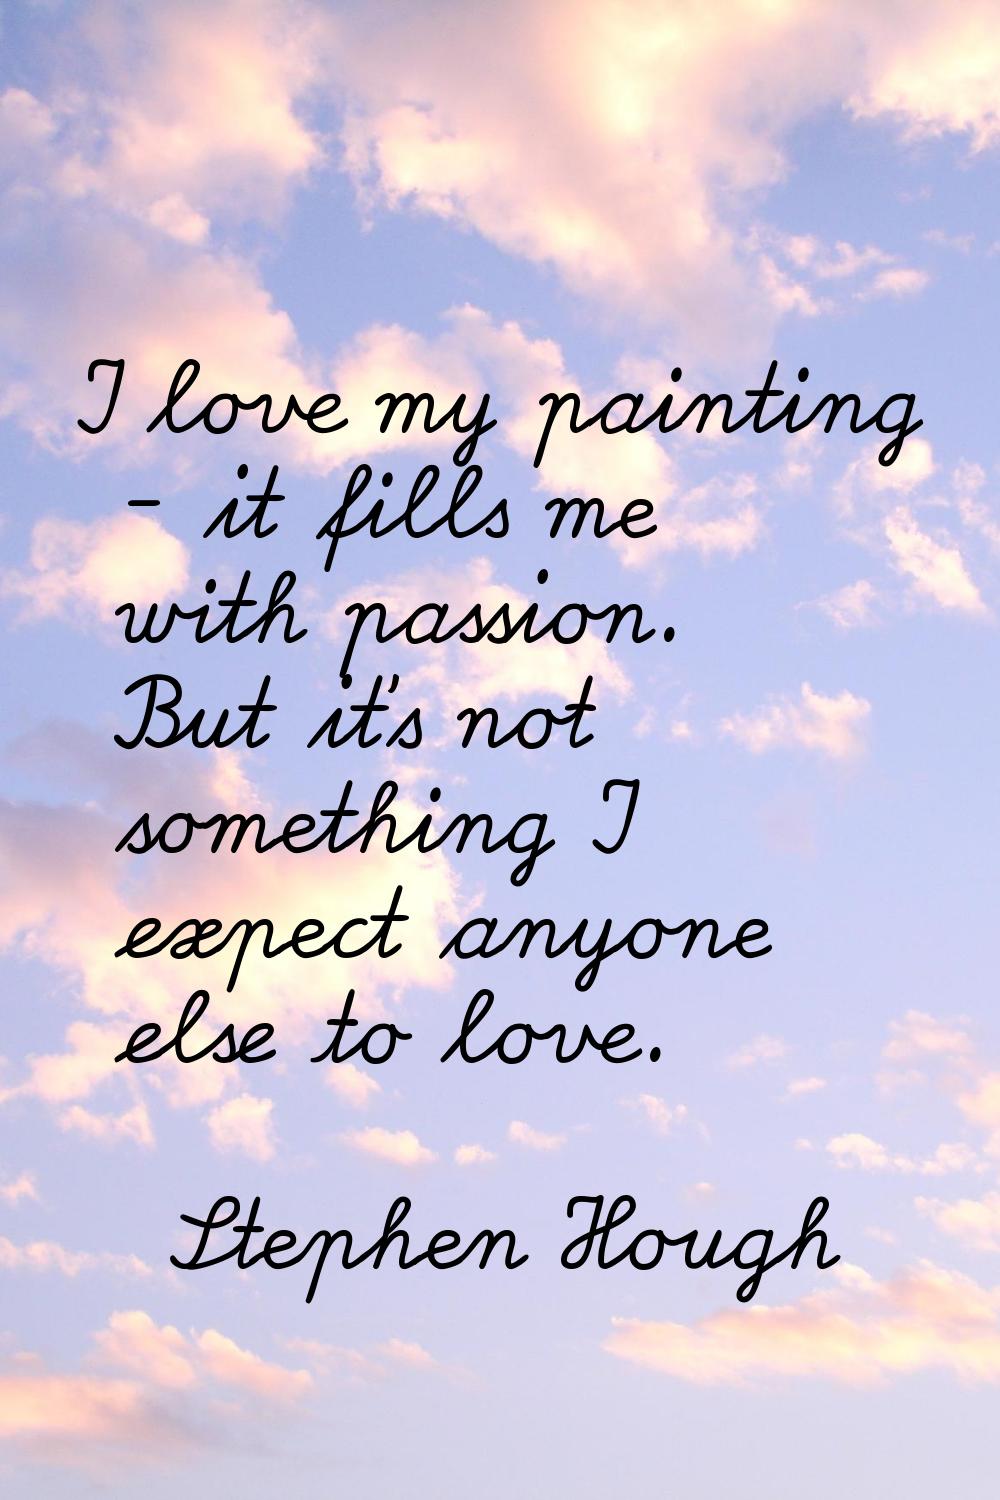 I love my painting - it fills me with passion. But it's not something I expect anyone else to love.